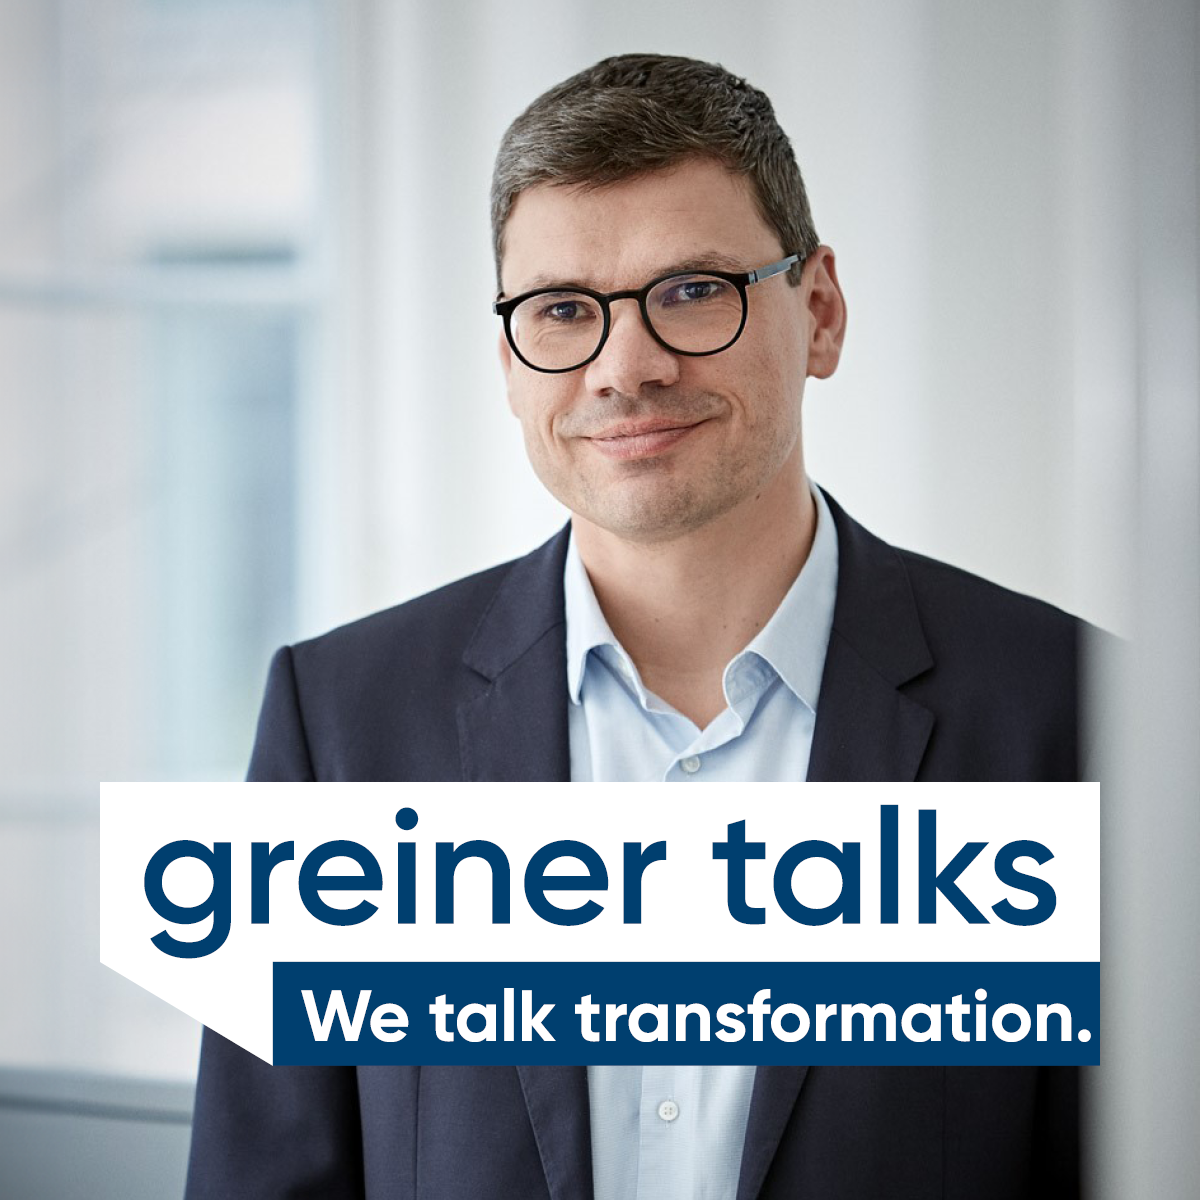 Greiner Talks: Andreas Rasche about the core of sustainability: Values and Responsibility